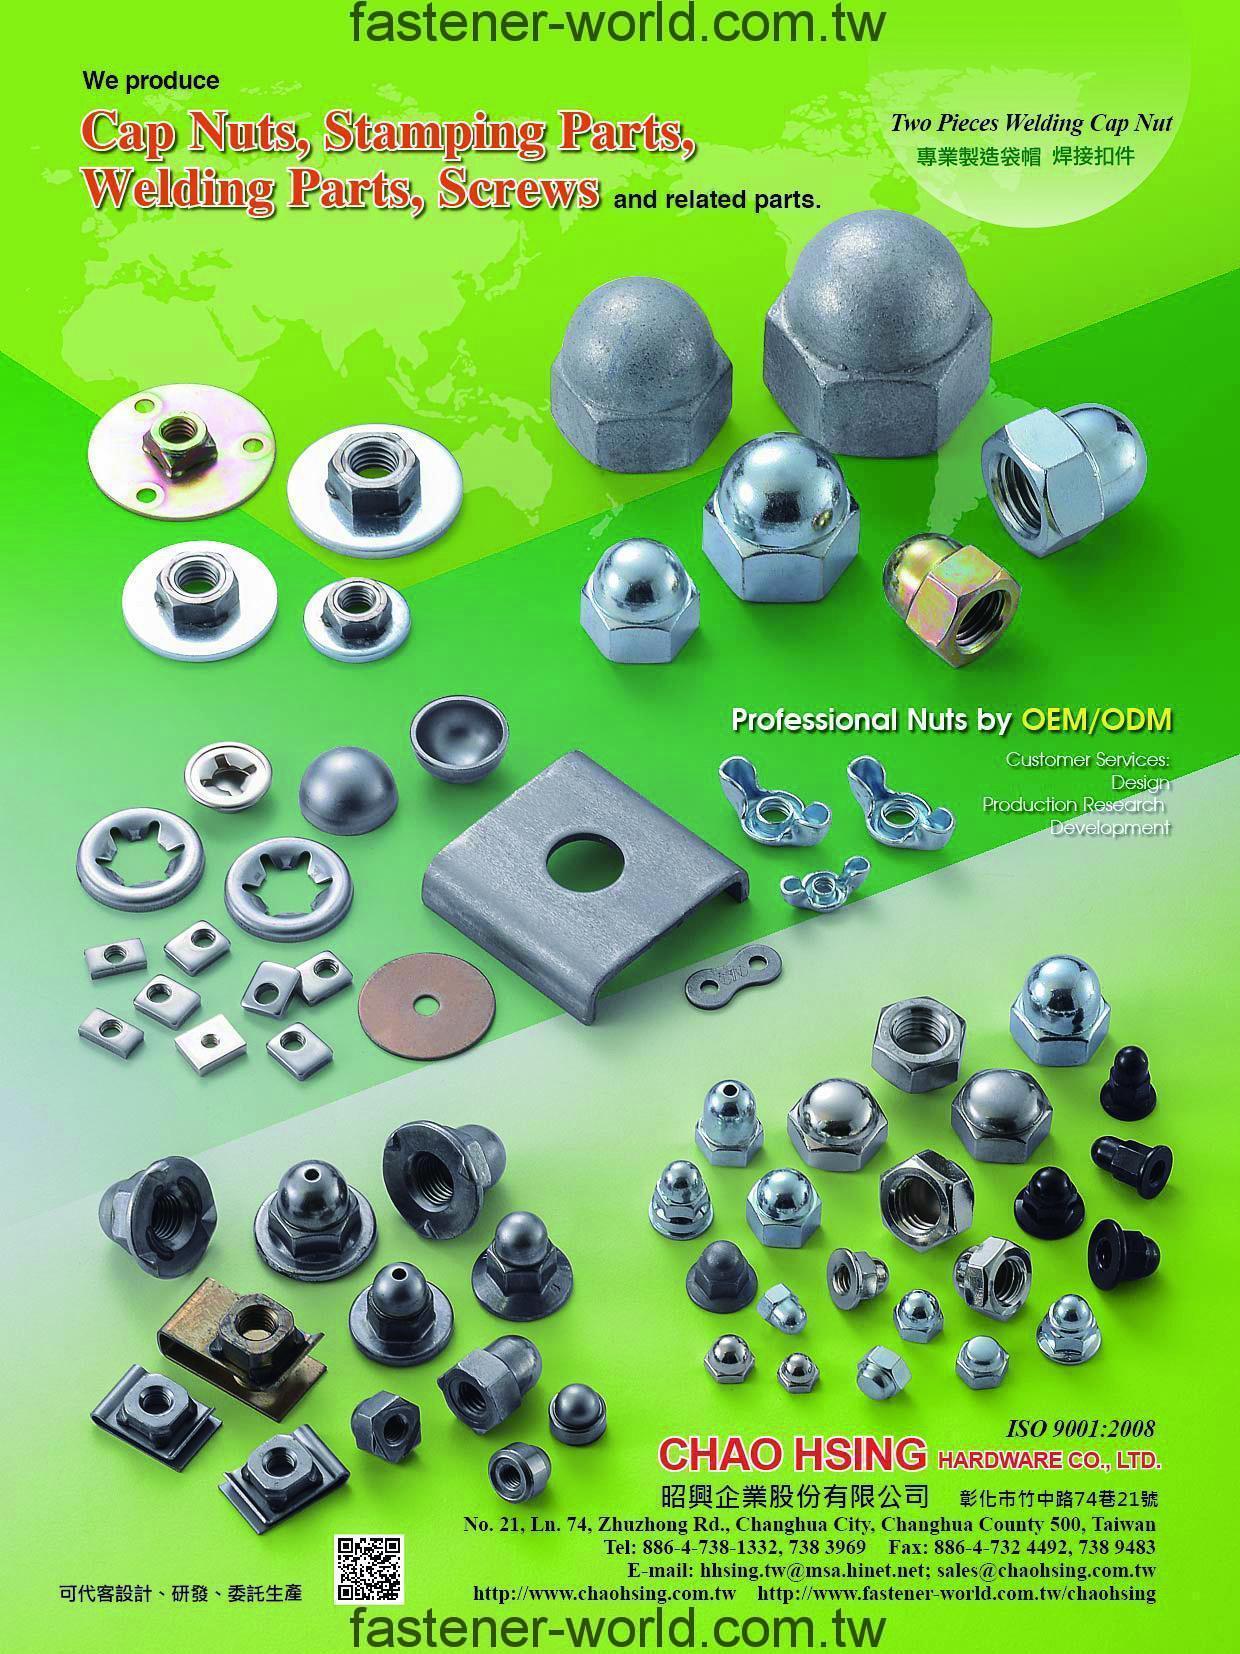 CHAO HSING HARDWARE CO., LTD.  Online Catalogues